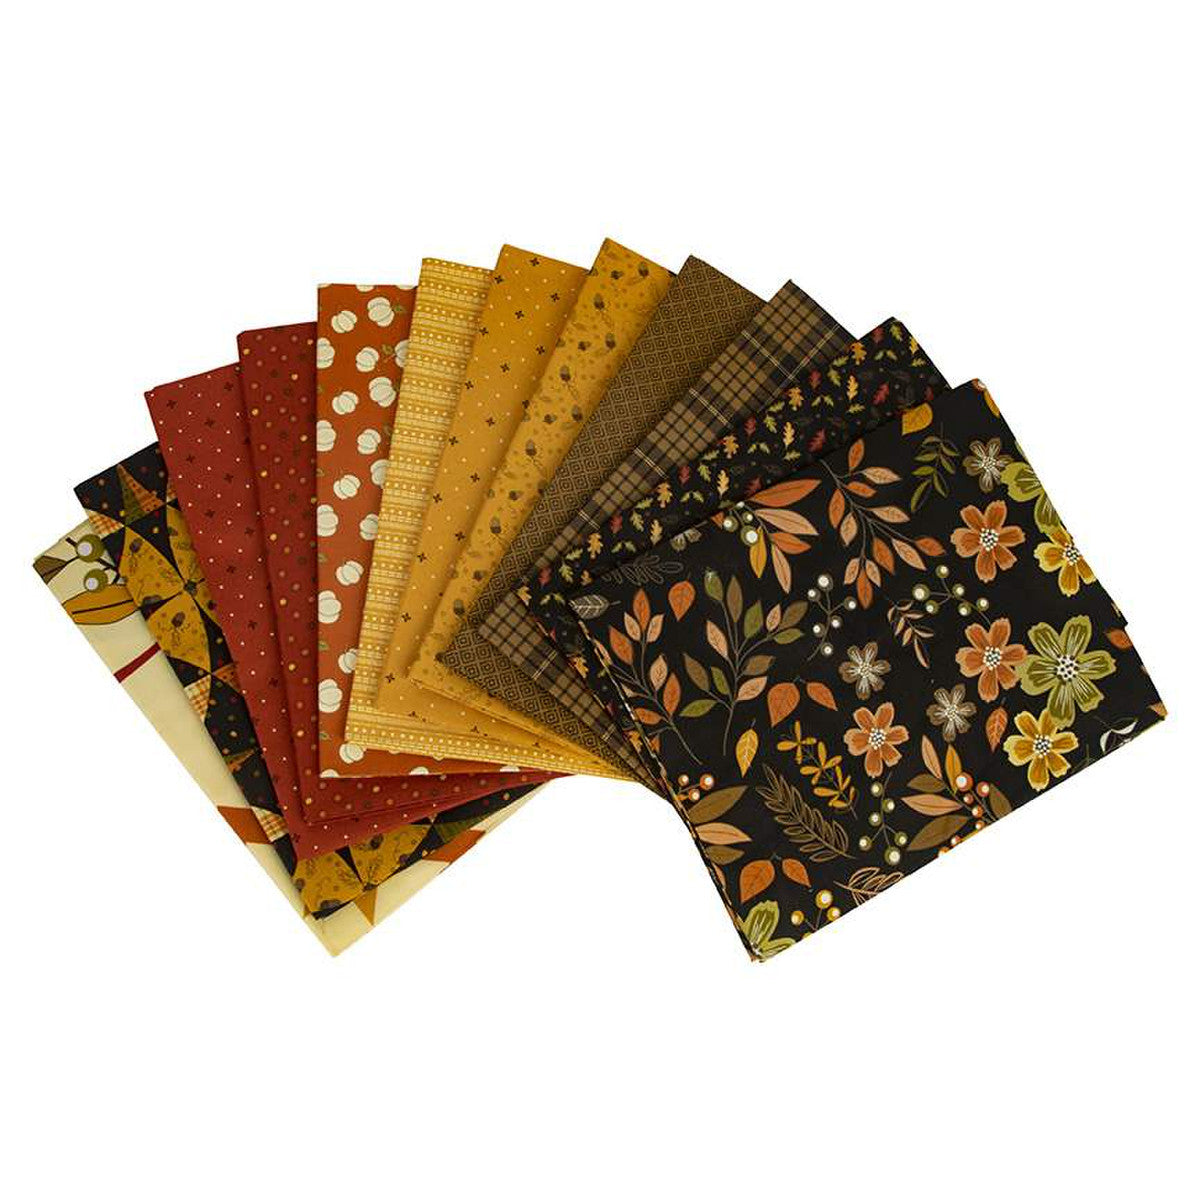 This 1-Yard precut bundle includes a 1-yard piece of each print in the raisin colorway (C12170-RAISIN, C12171-ORANGE, C12172-SAFFRON, C12173-RAISIN, C12174-SIENNA, C12175-RED, C12176-RED, C12176-SAFFRON, C12177-SIENNA, C12178-SAFFRON, CH12179-MULTI) and the P12180-RAISIN panel from the Awesome Autumn collection by Sandy Gervais for Riley Blake Designs for a total of 11 yards and 1 panel.  100% cotton  Width: 43"/44"